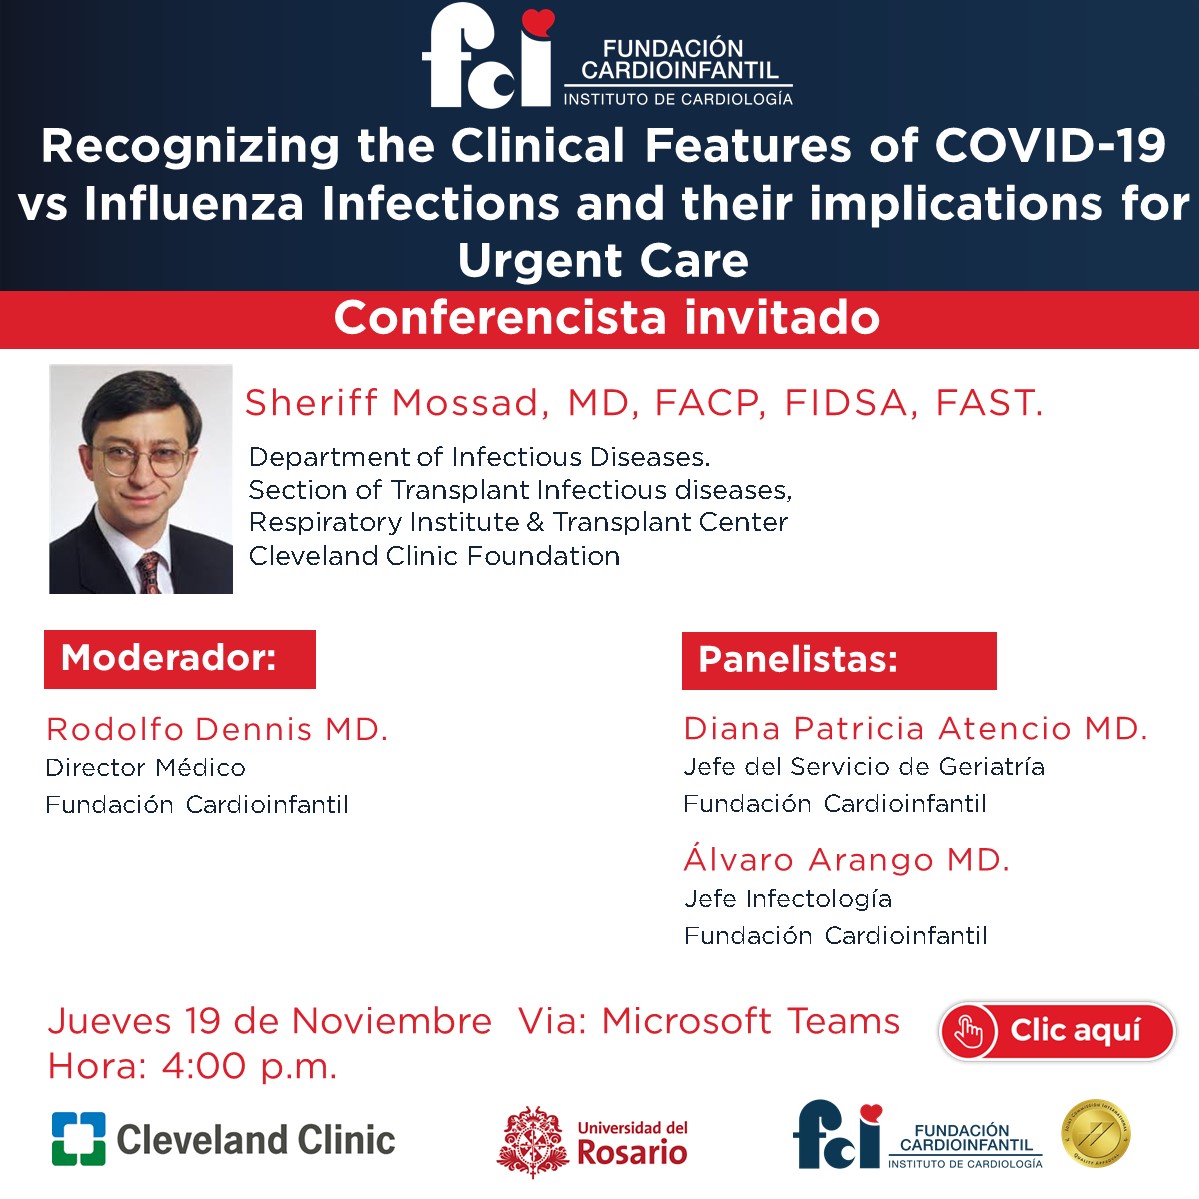 Webinar: Recognizing the Clinical Features of COVID-19 vs Influenza Infections and their implications for Urgent Care